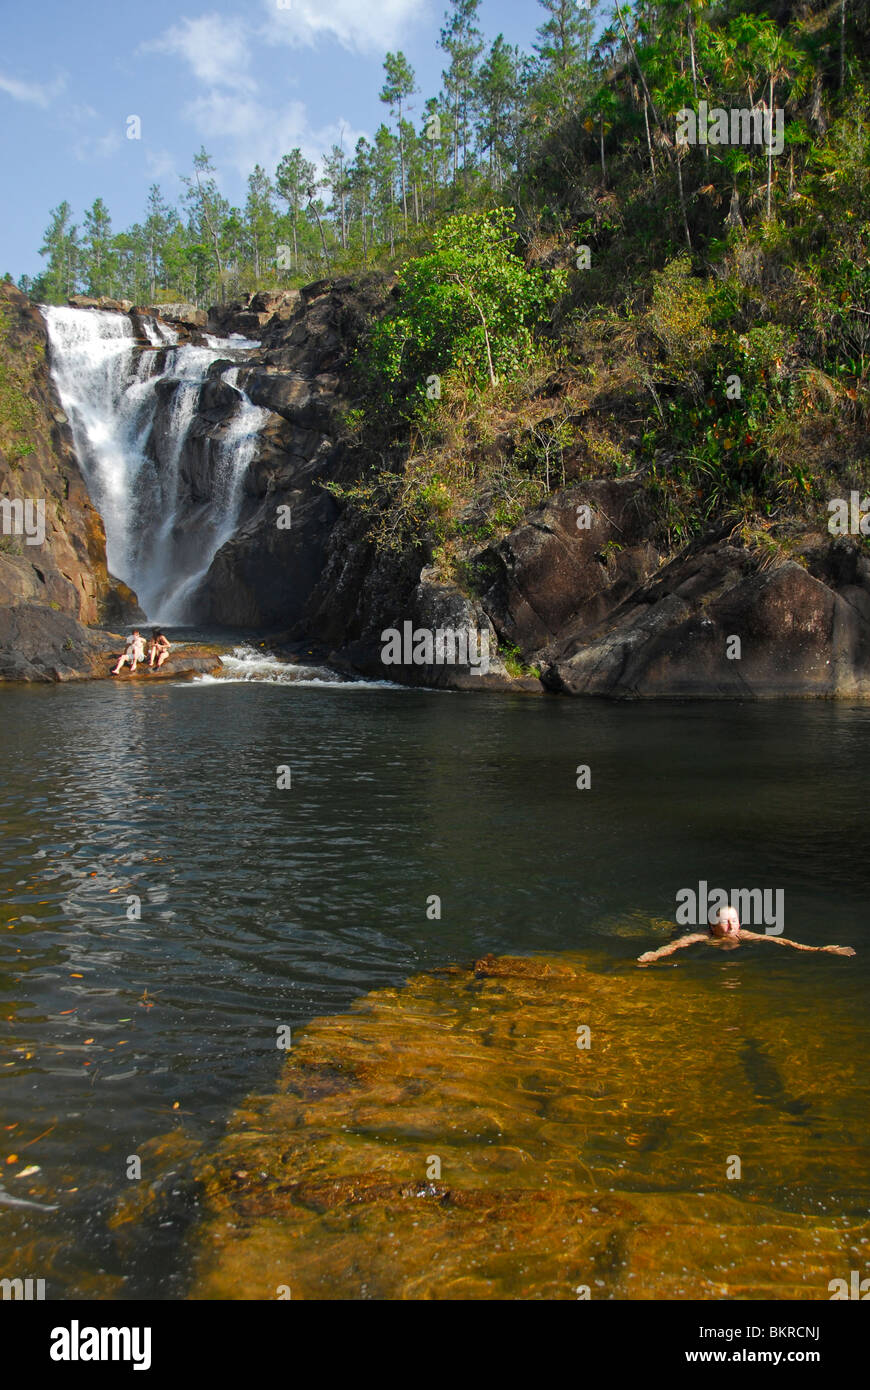 Tourists in Rio Frio waterfall area, Mountain Pine Ridge Forest Reserve, Cayo District, Maya Mountain, Belize, Central America Stock Photo